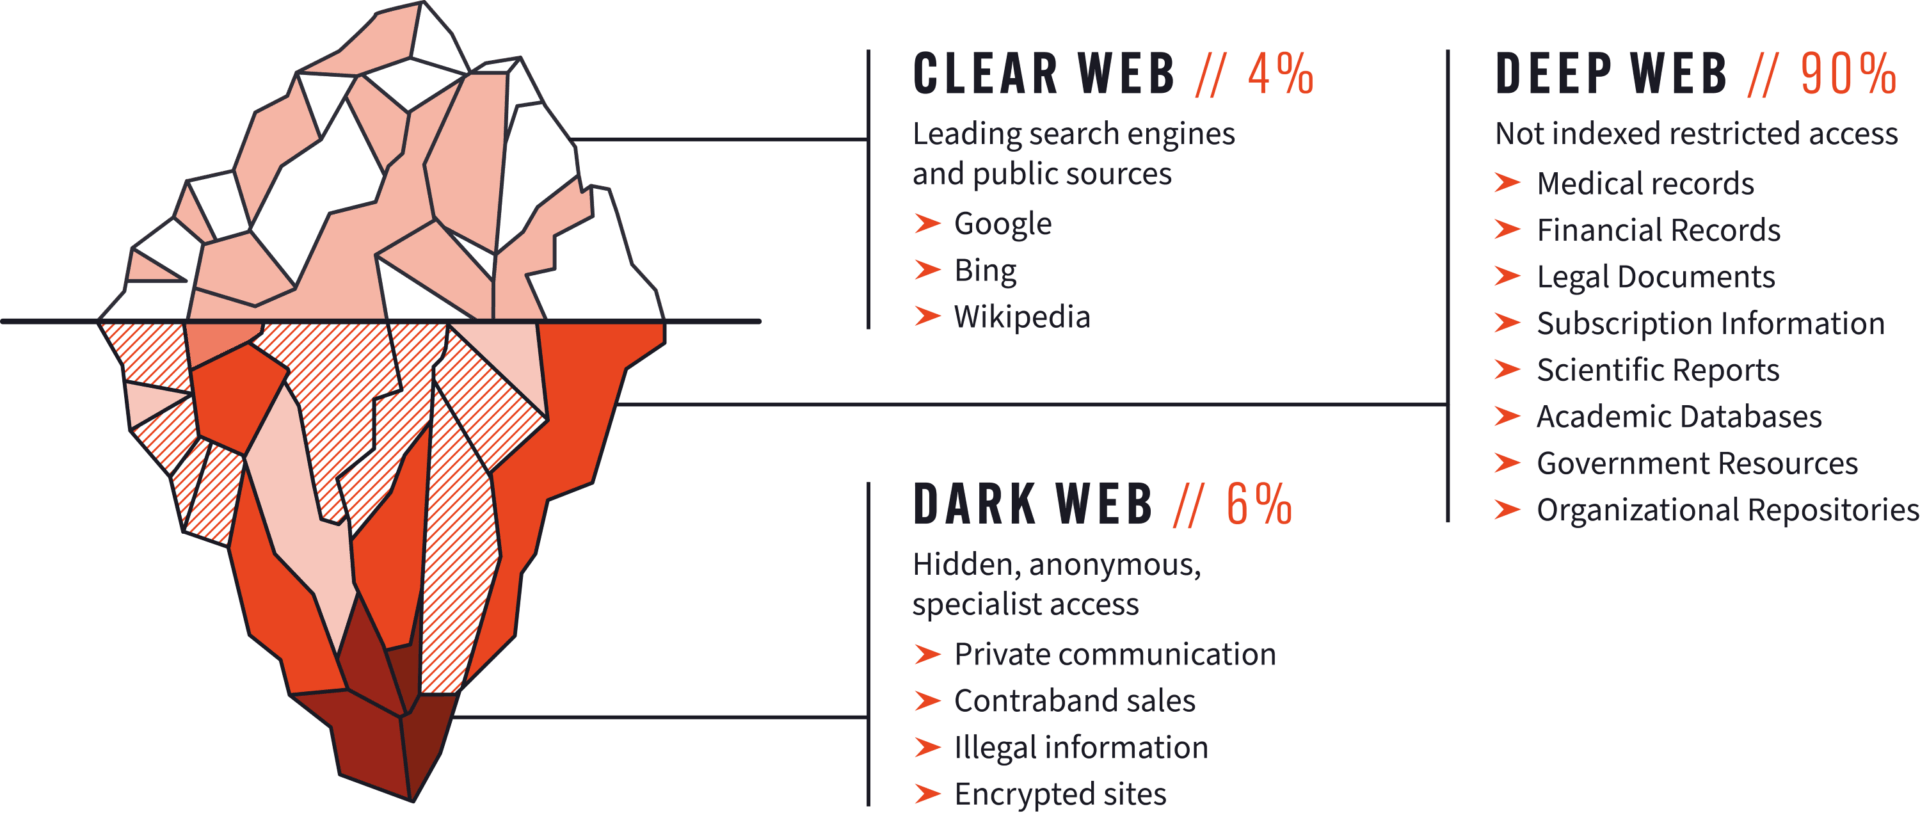 Visualization of the clear, deep, and dark web - showing how much of the internet is made up by the dark web